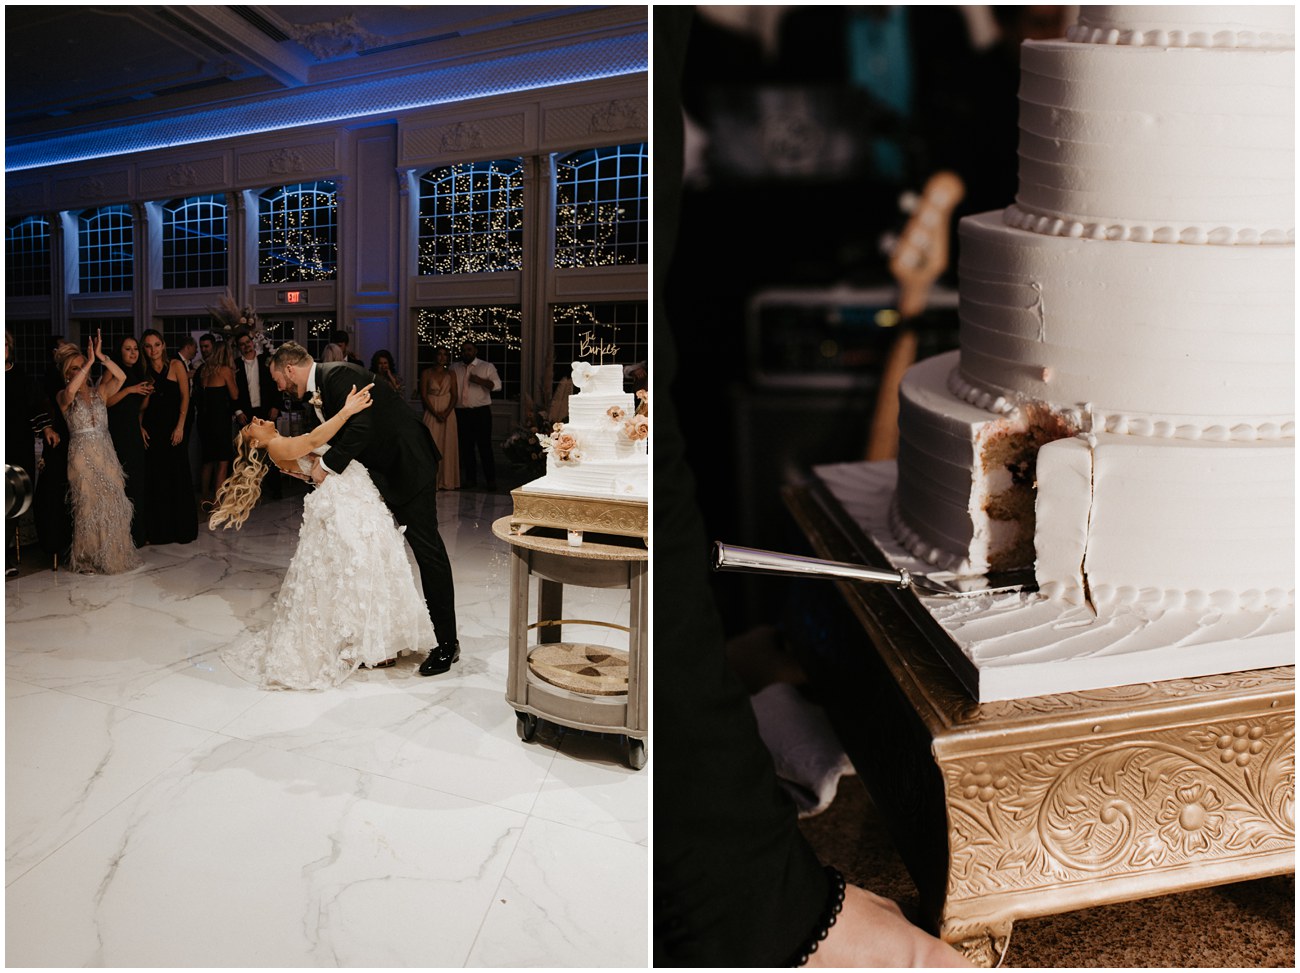 bride and groom cut cake during wedding reception at florentine gardens in new jersey